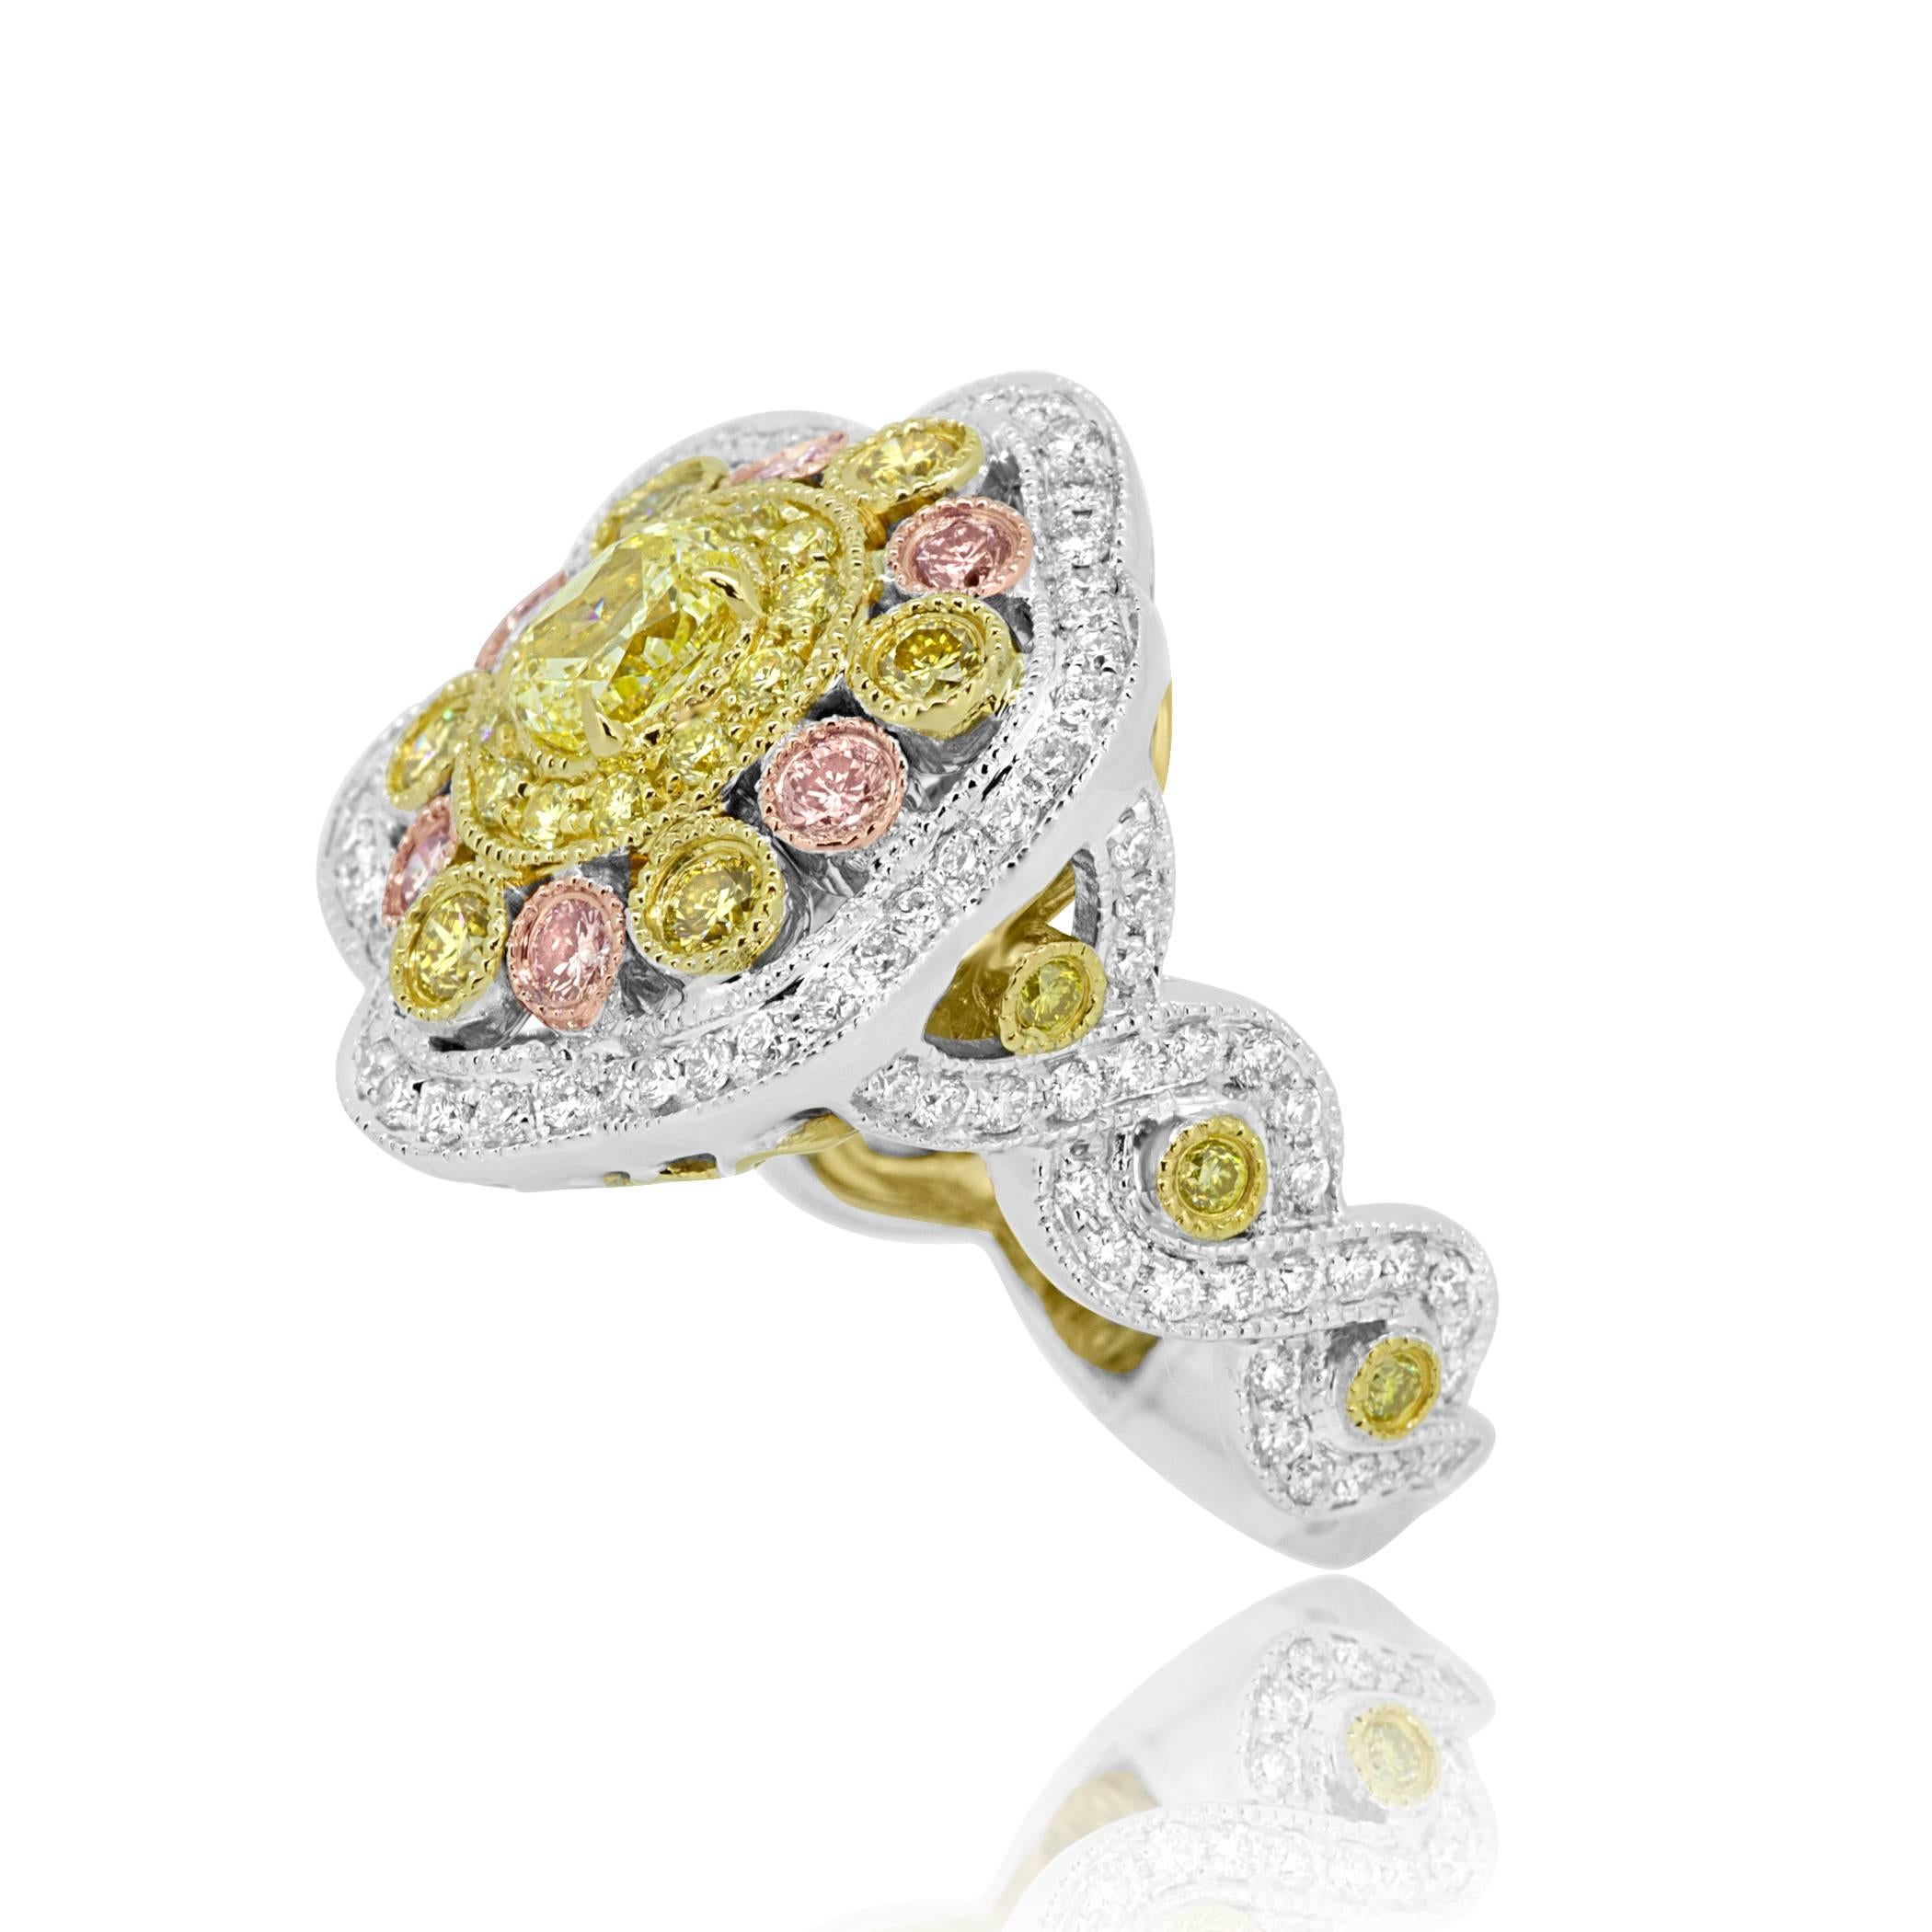 Fancy yellow Oval 0.56 Carat encircled by Fancy Yellow Diamond 0.64 carat, Natural Pink Diamond 0.25 Carat and White Diamond 0.65 Carat in 18K Yellow,Rose and white Gold with twisted rope shank. With Milgrain all around,